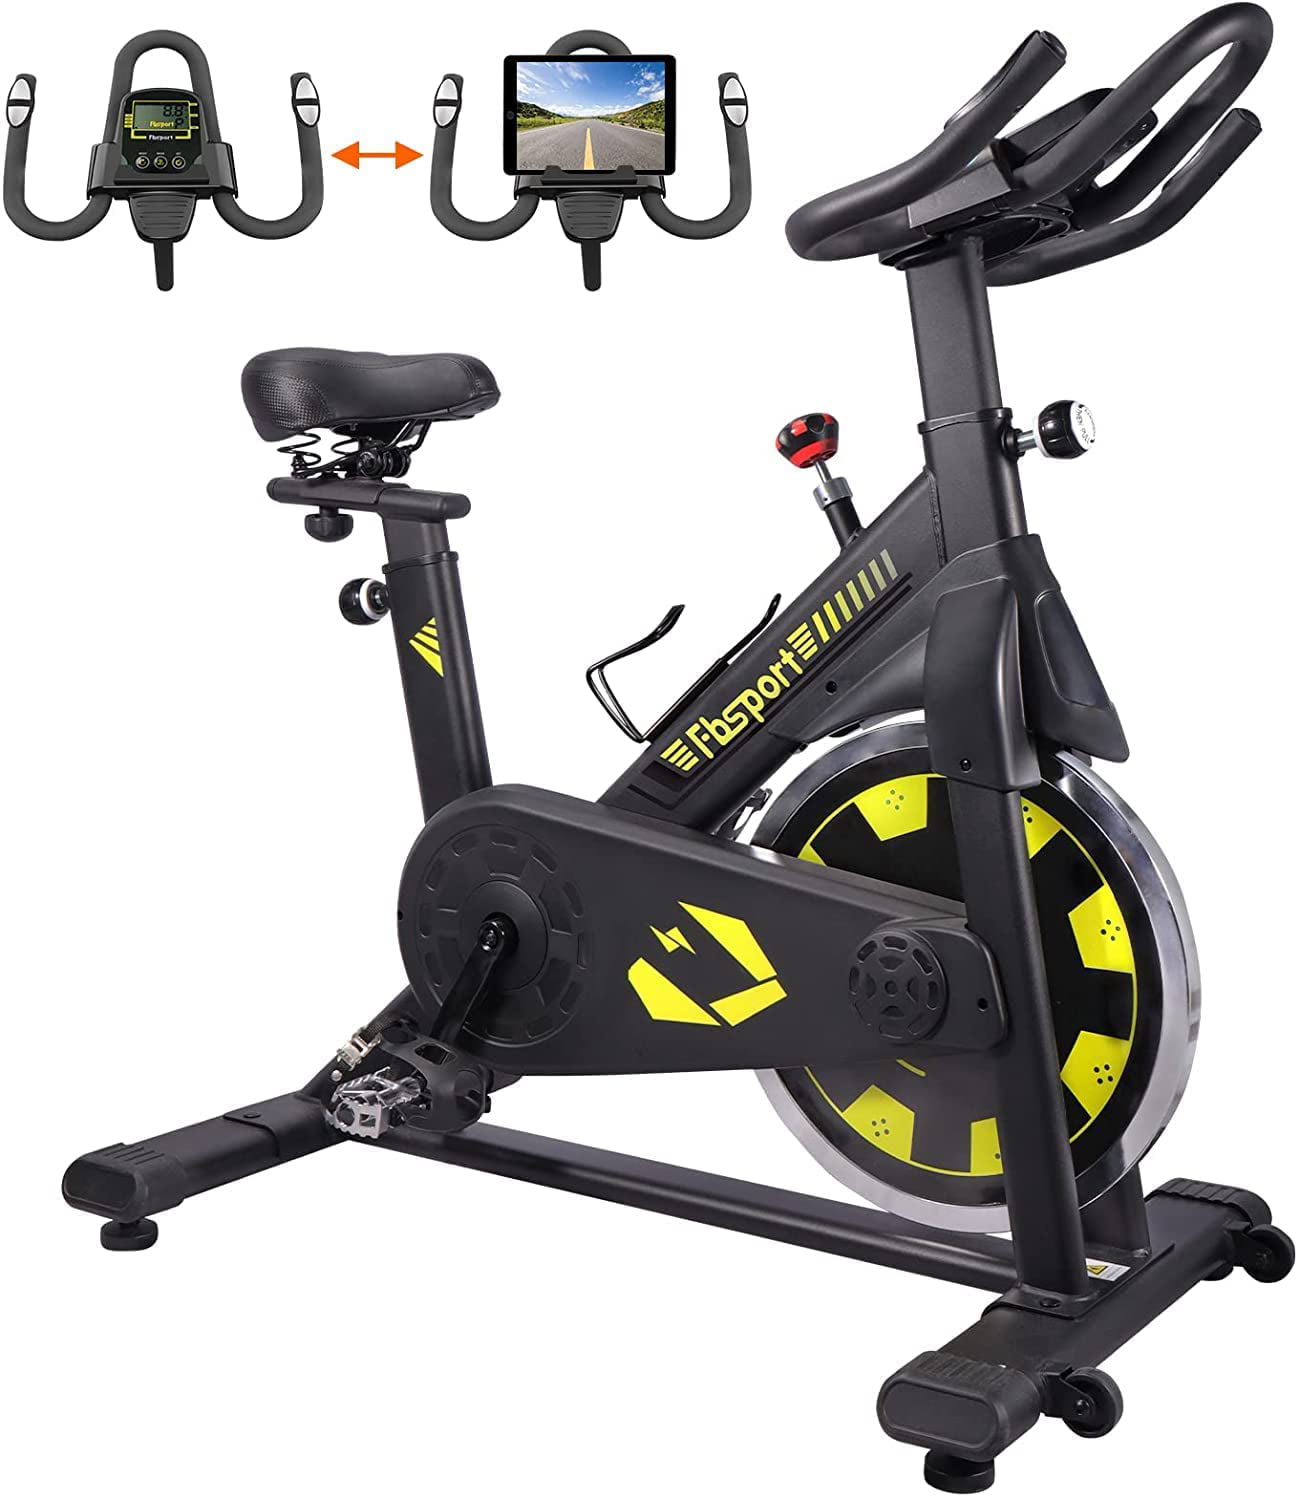 Details about   Exercise Pedal Mini Cycle Stepper Bike Aerobic Motion Home Gym W/ Digital Device 